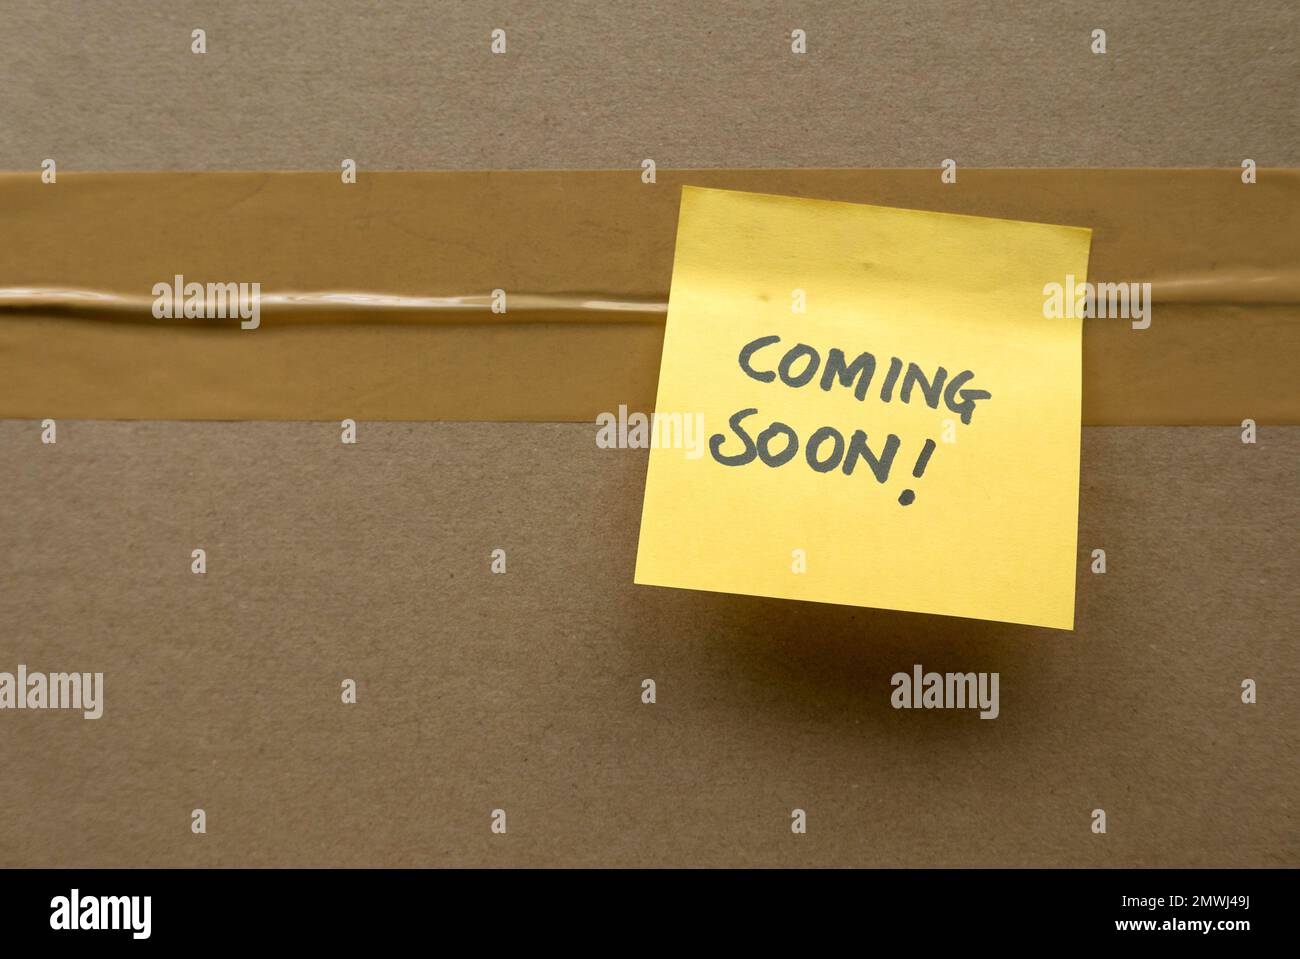 A box seal with adhesive tape and a yellow memo note written with coming soon. Stock Photo